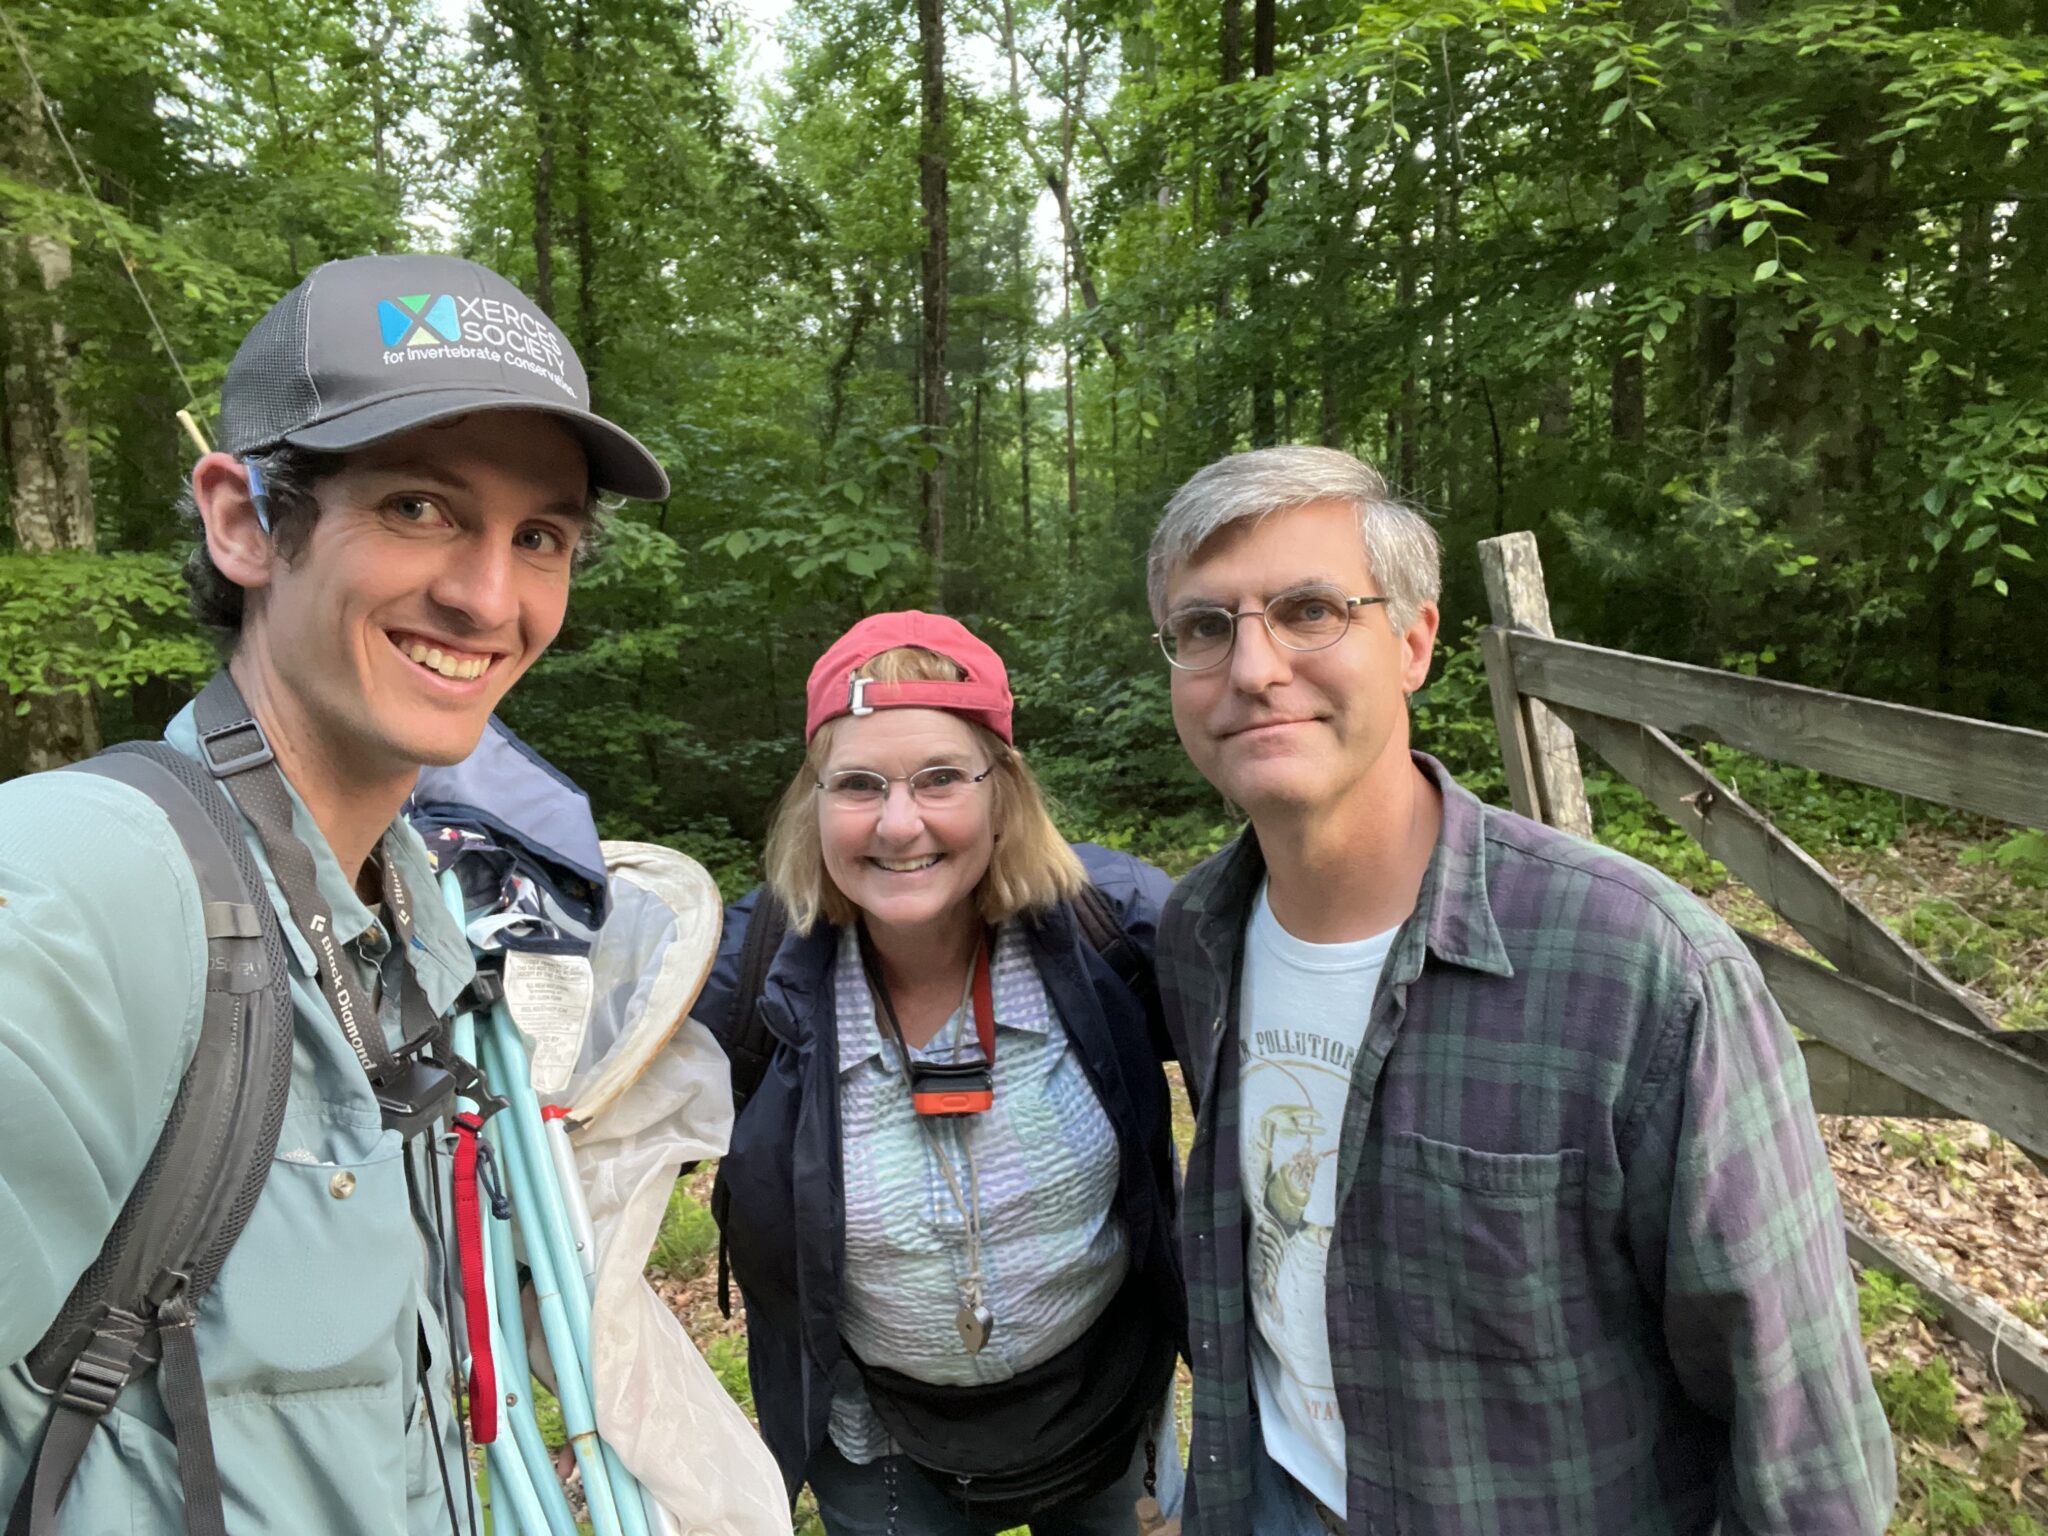 Three smiling people, some with insect nets and headlamps.